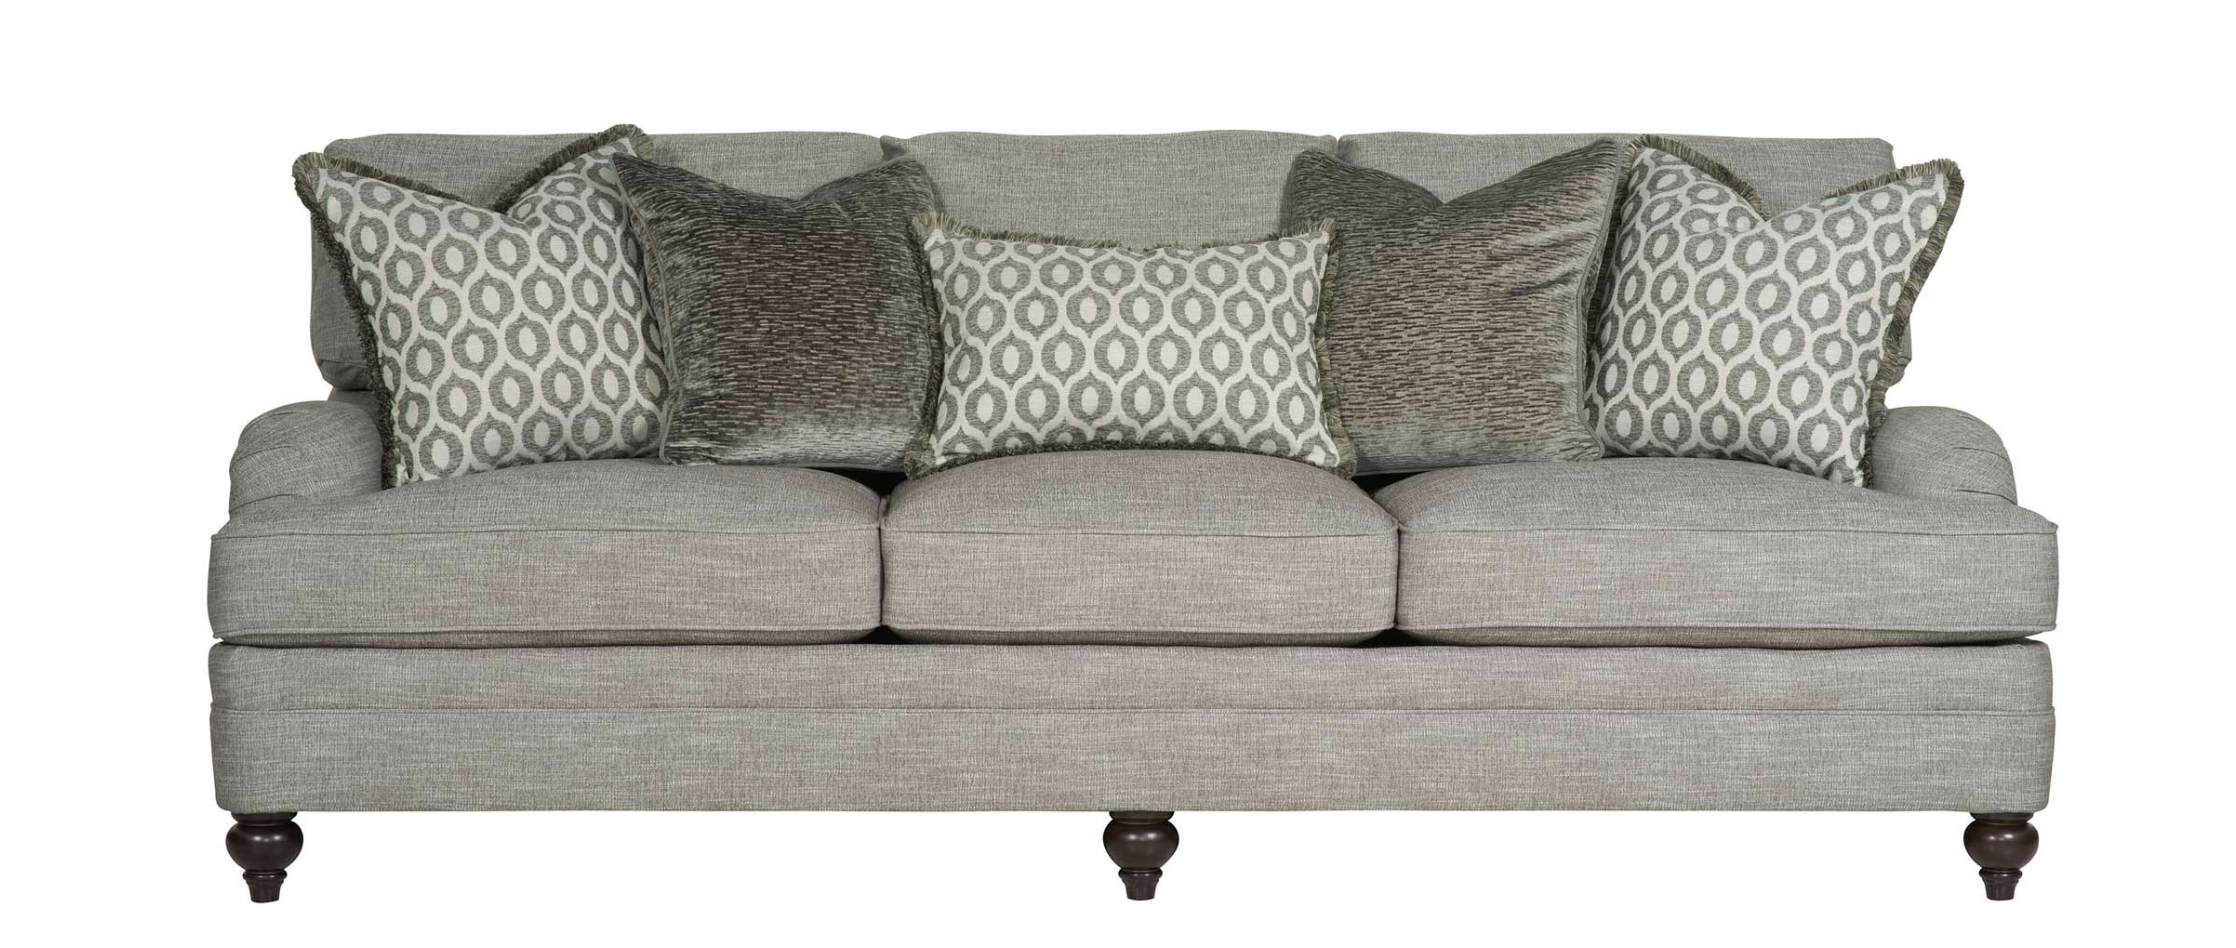 grey luxury couch from bernhardt with patterned throw pillows